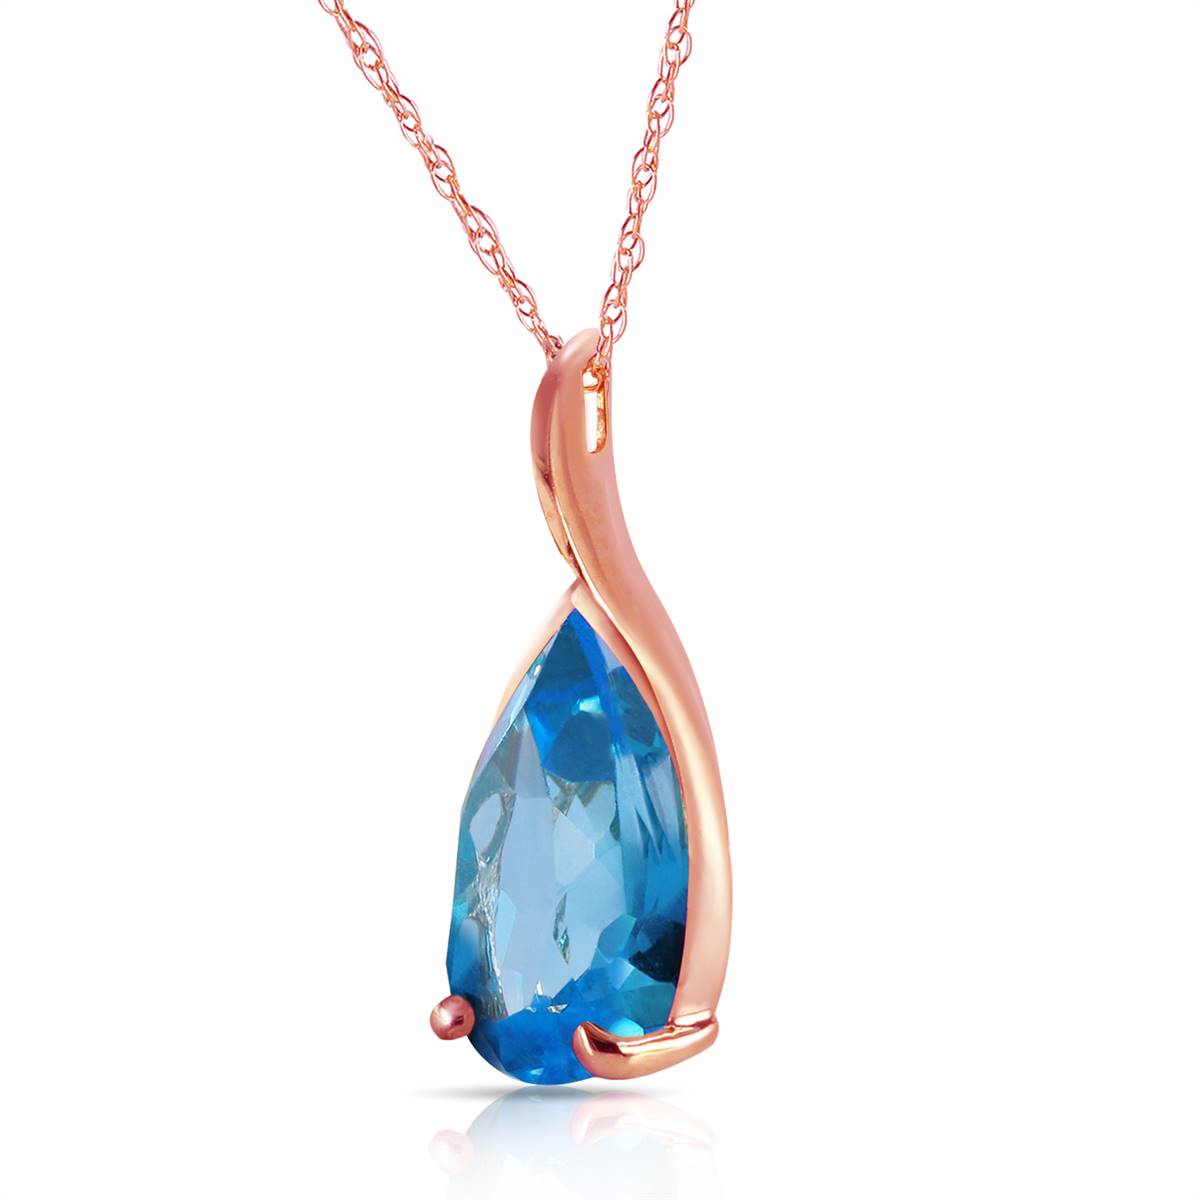 14K Solid Rose Gold Blue Topaz New Genuine Deluxe Necklace